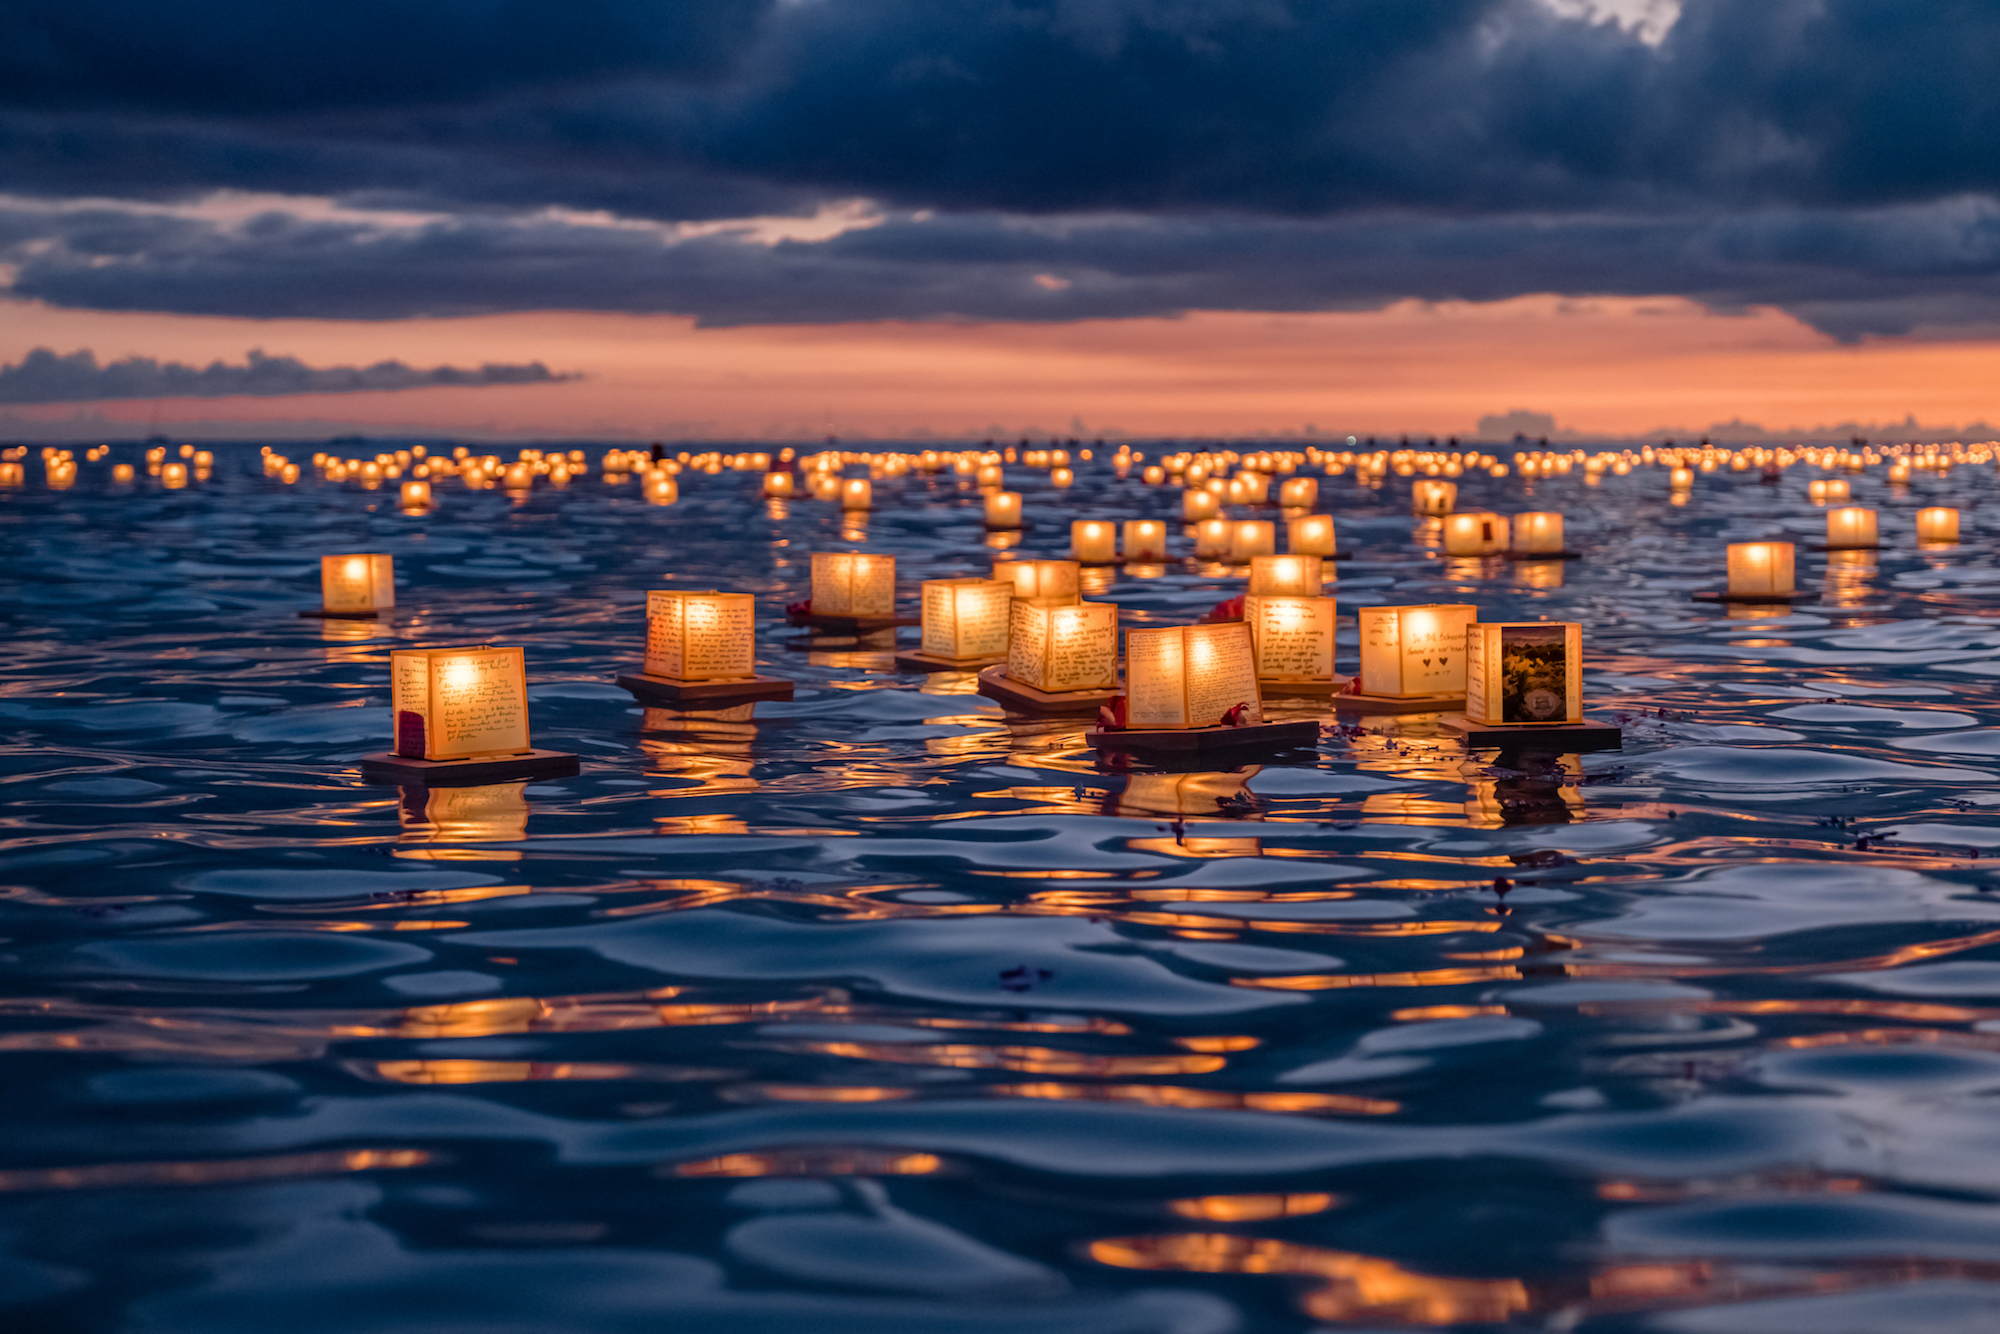 Lantern Floating Hawaii brings together over 40,000 people on the south shore of Oahu.